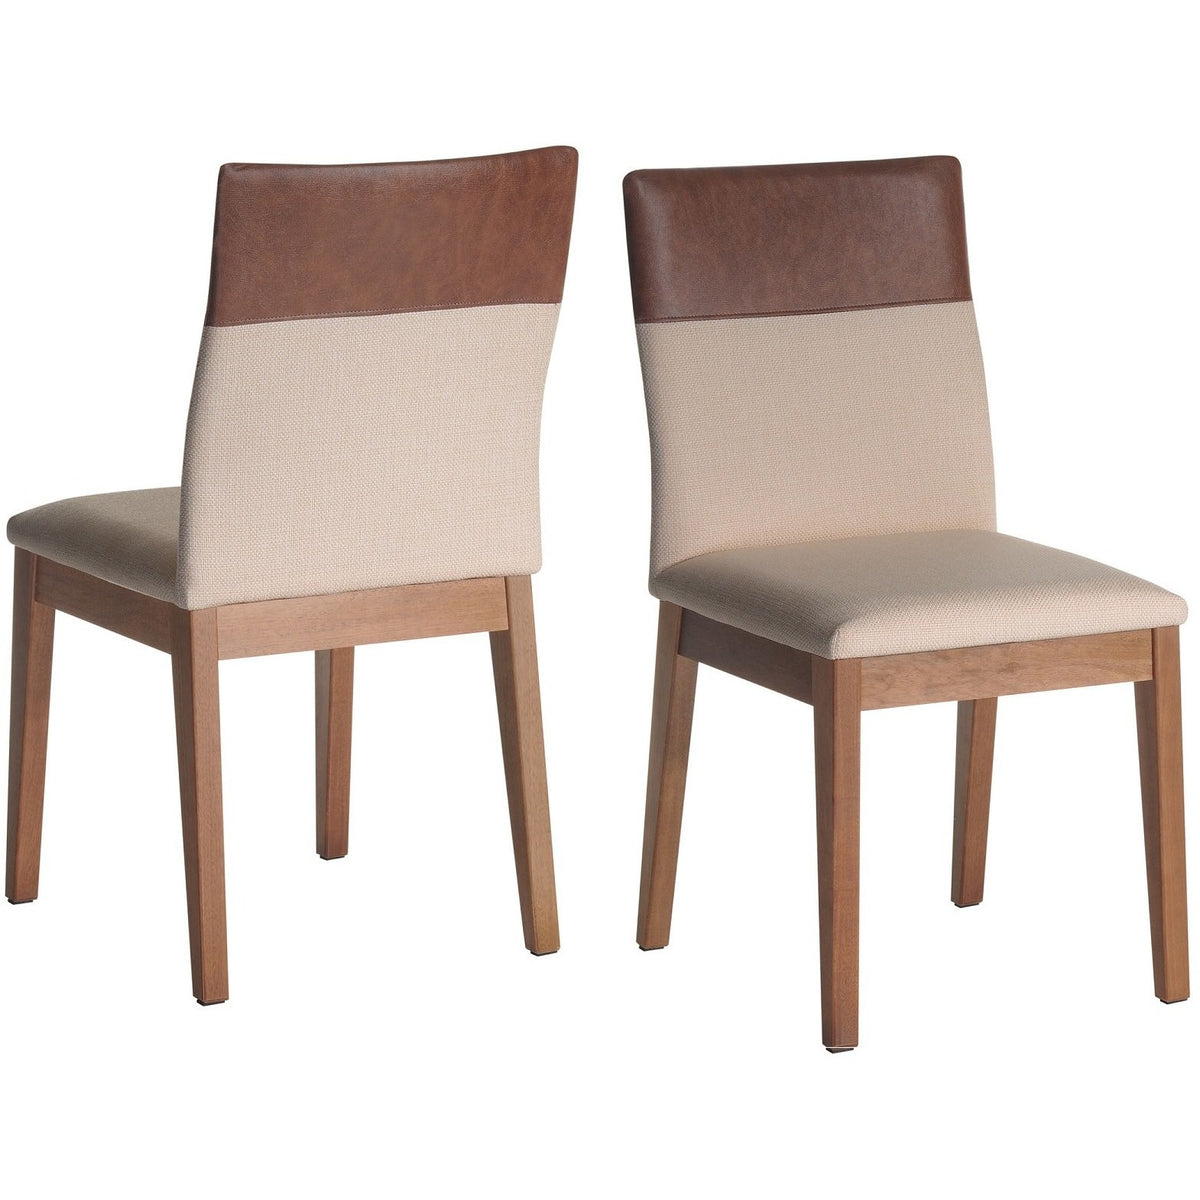 Manhattan Comfort Duke 2-Piece Dining Chair with Synthetic Leather in Dark Beige and Brown-Minimal & Modern